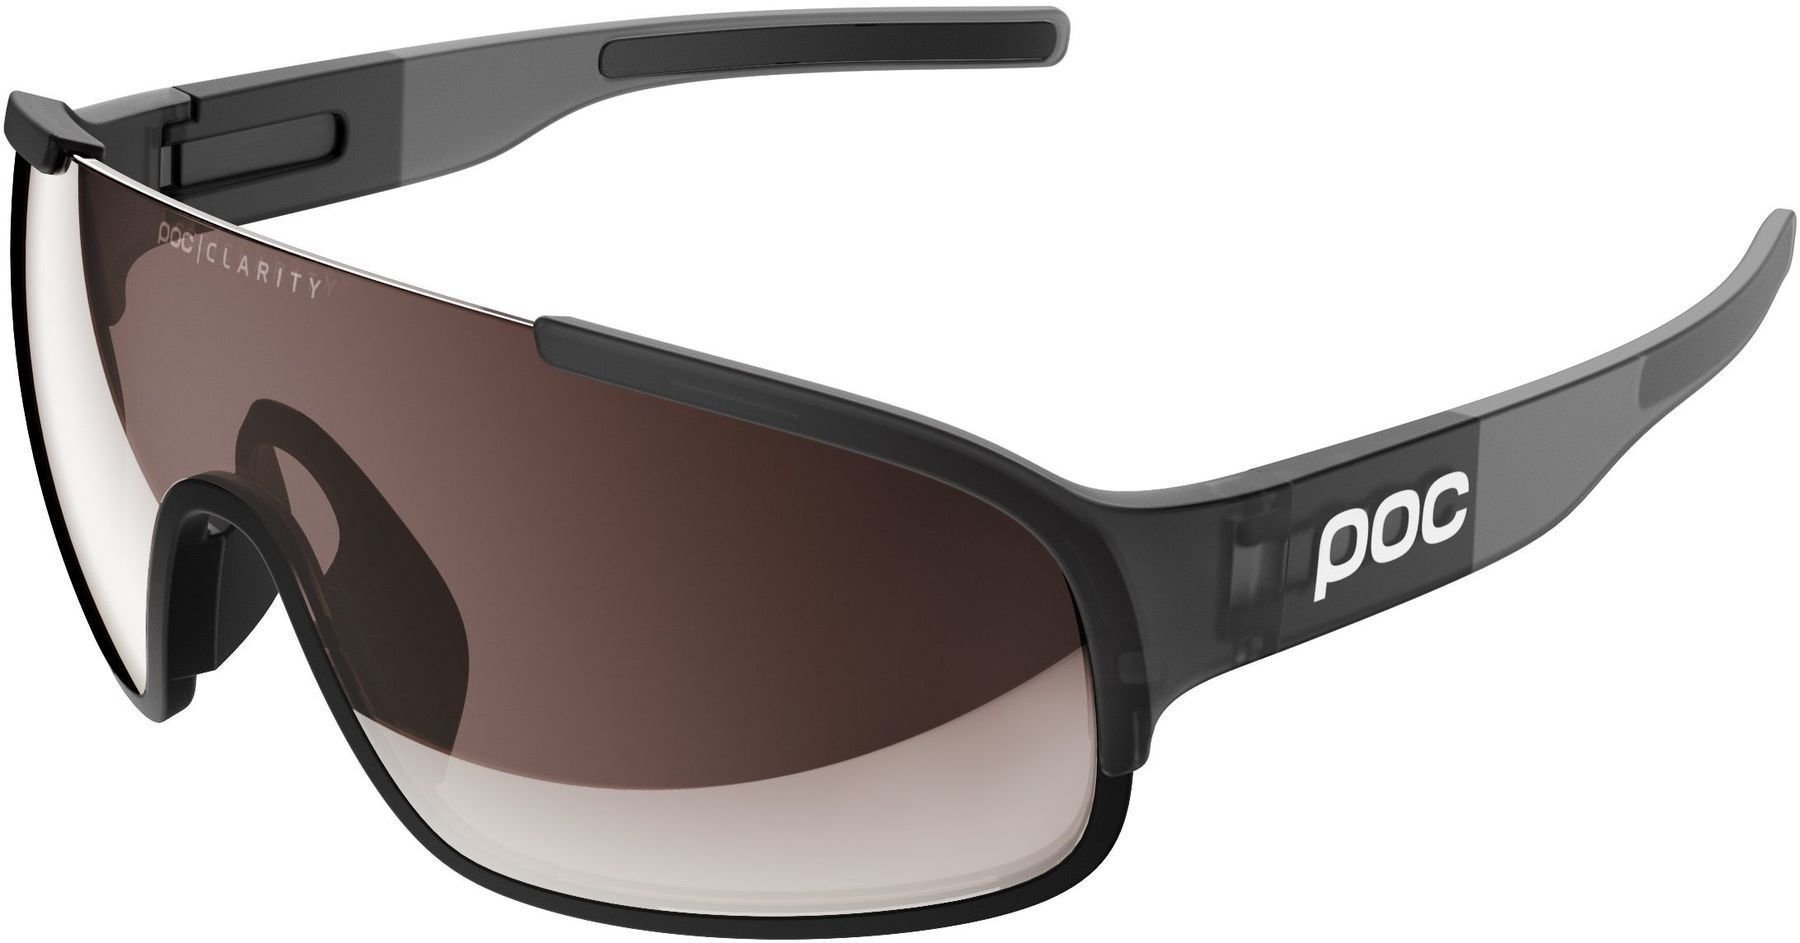 Cycling Glasses POC Crave Clarity Uranium Black Translucent/Grey/Brown Silver Mirror Cycling Glasses